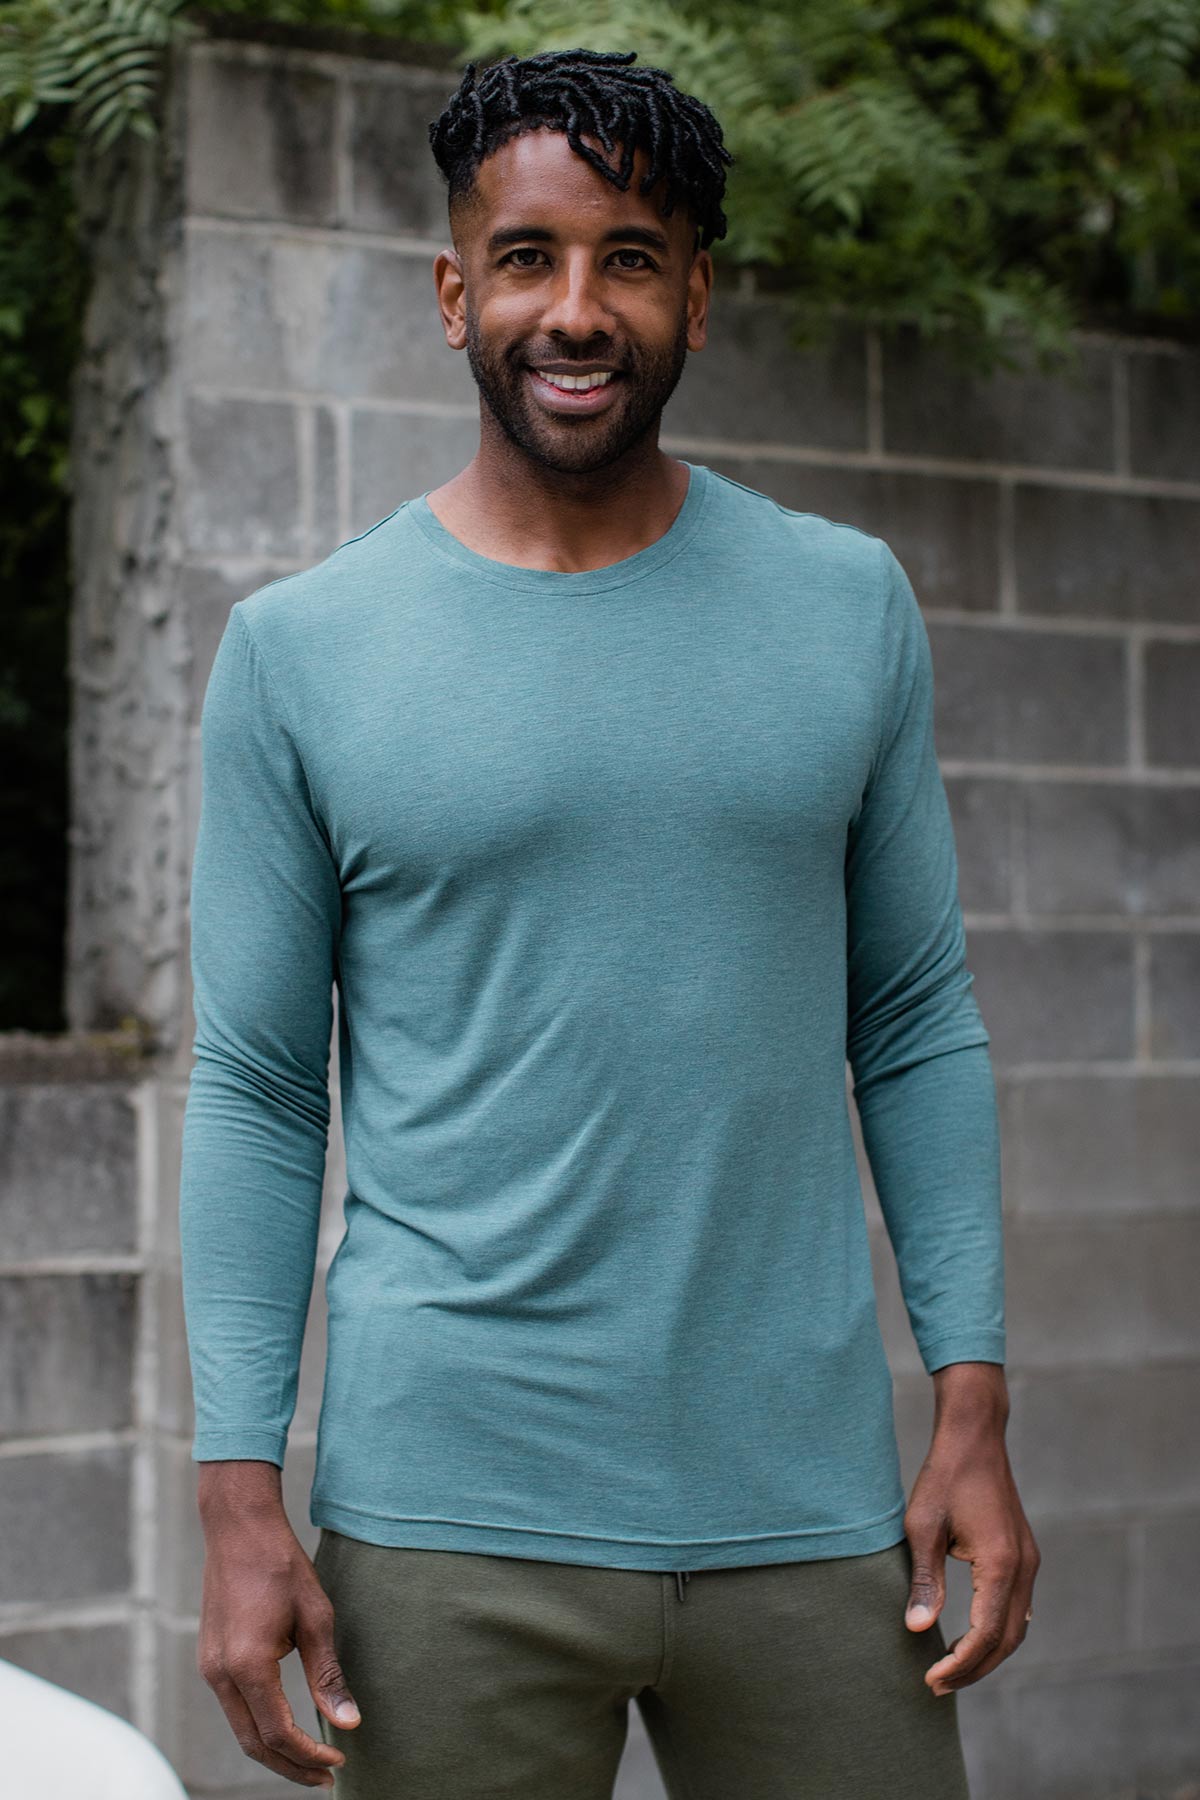 A man standing and smiling with his hands at his sides, wearing Yala Jonah Men's Long Sleeve Bamboo Crew Tee Shirt in Teal Melange